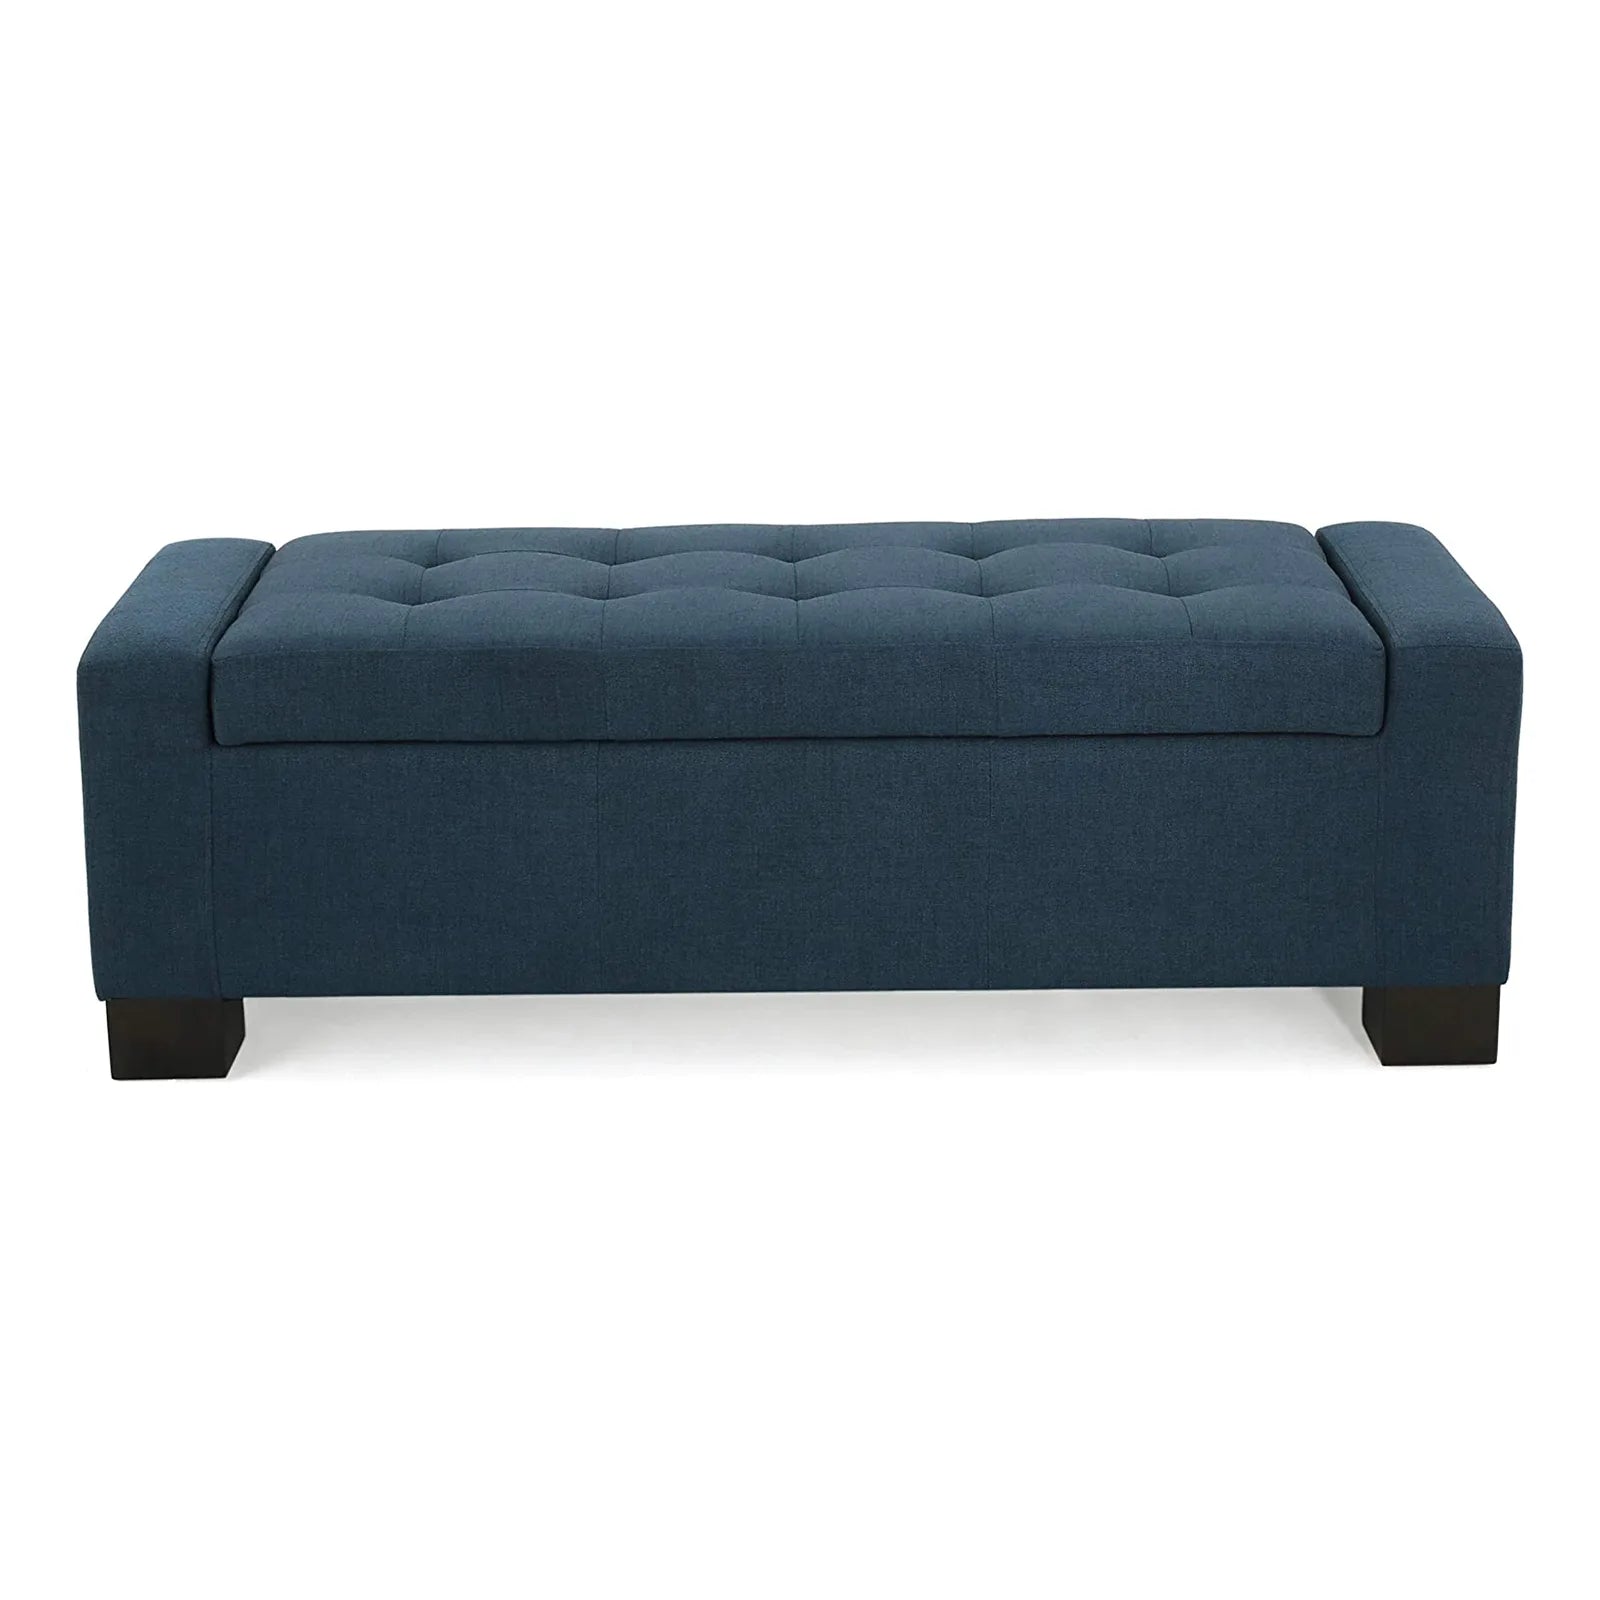 Button Tufted Upholstered Lift Up Storage Ottoman and Bench